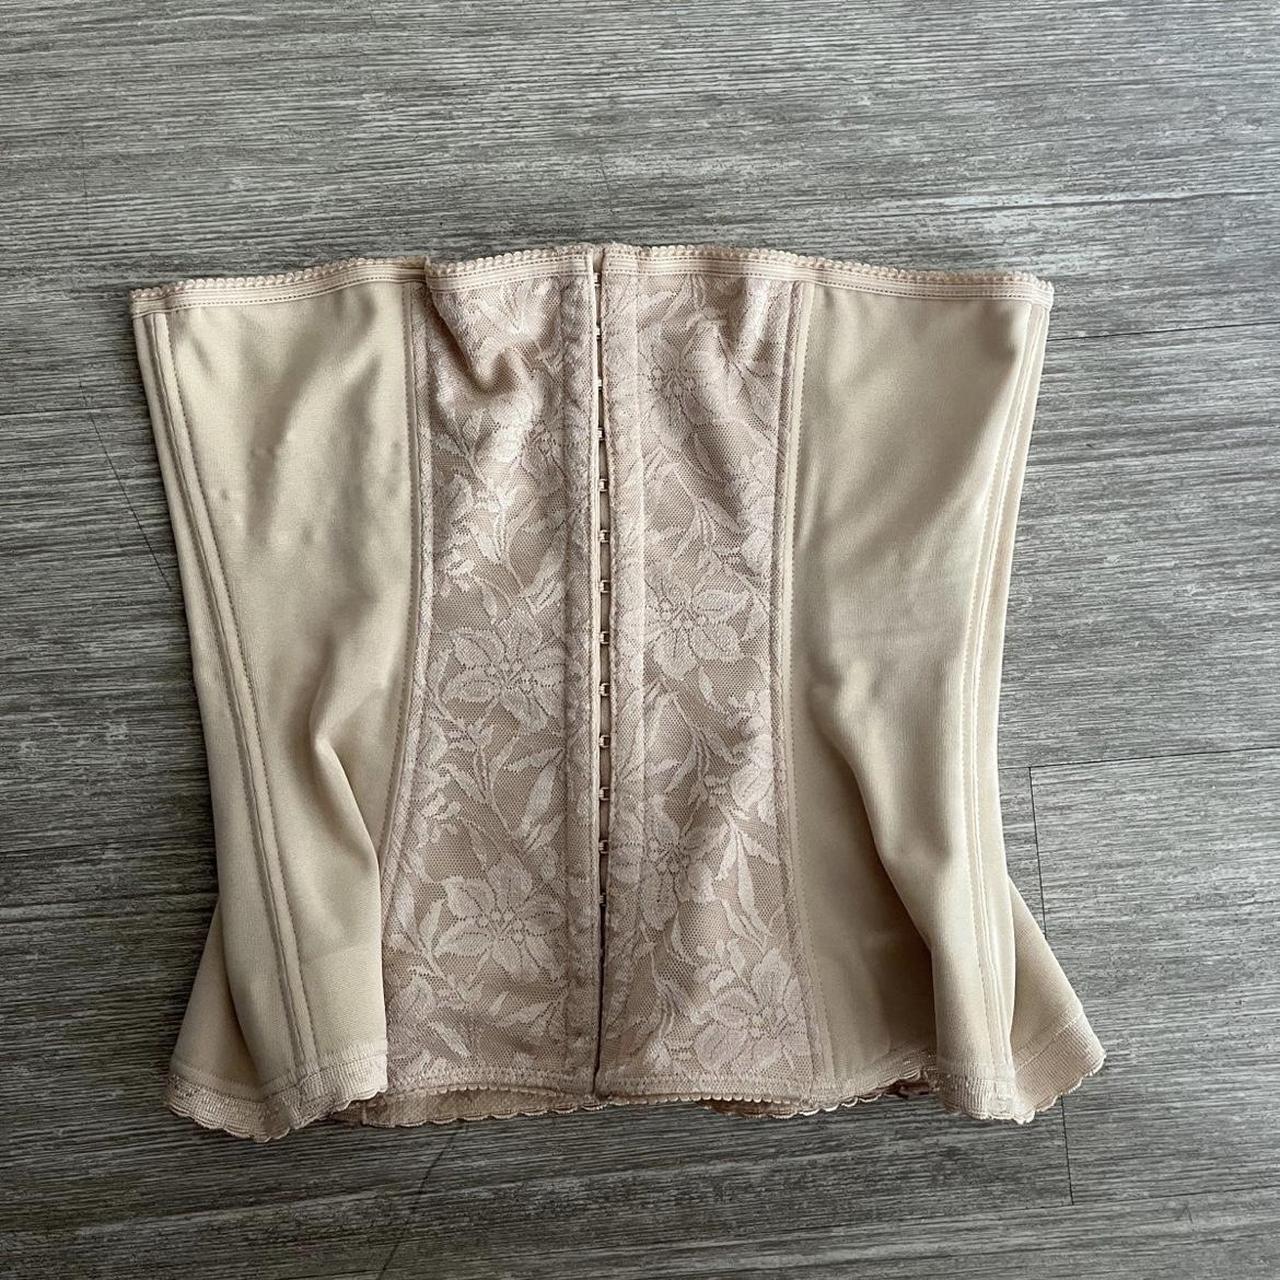 Shapewear corset from the brand luleh size